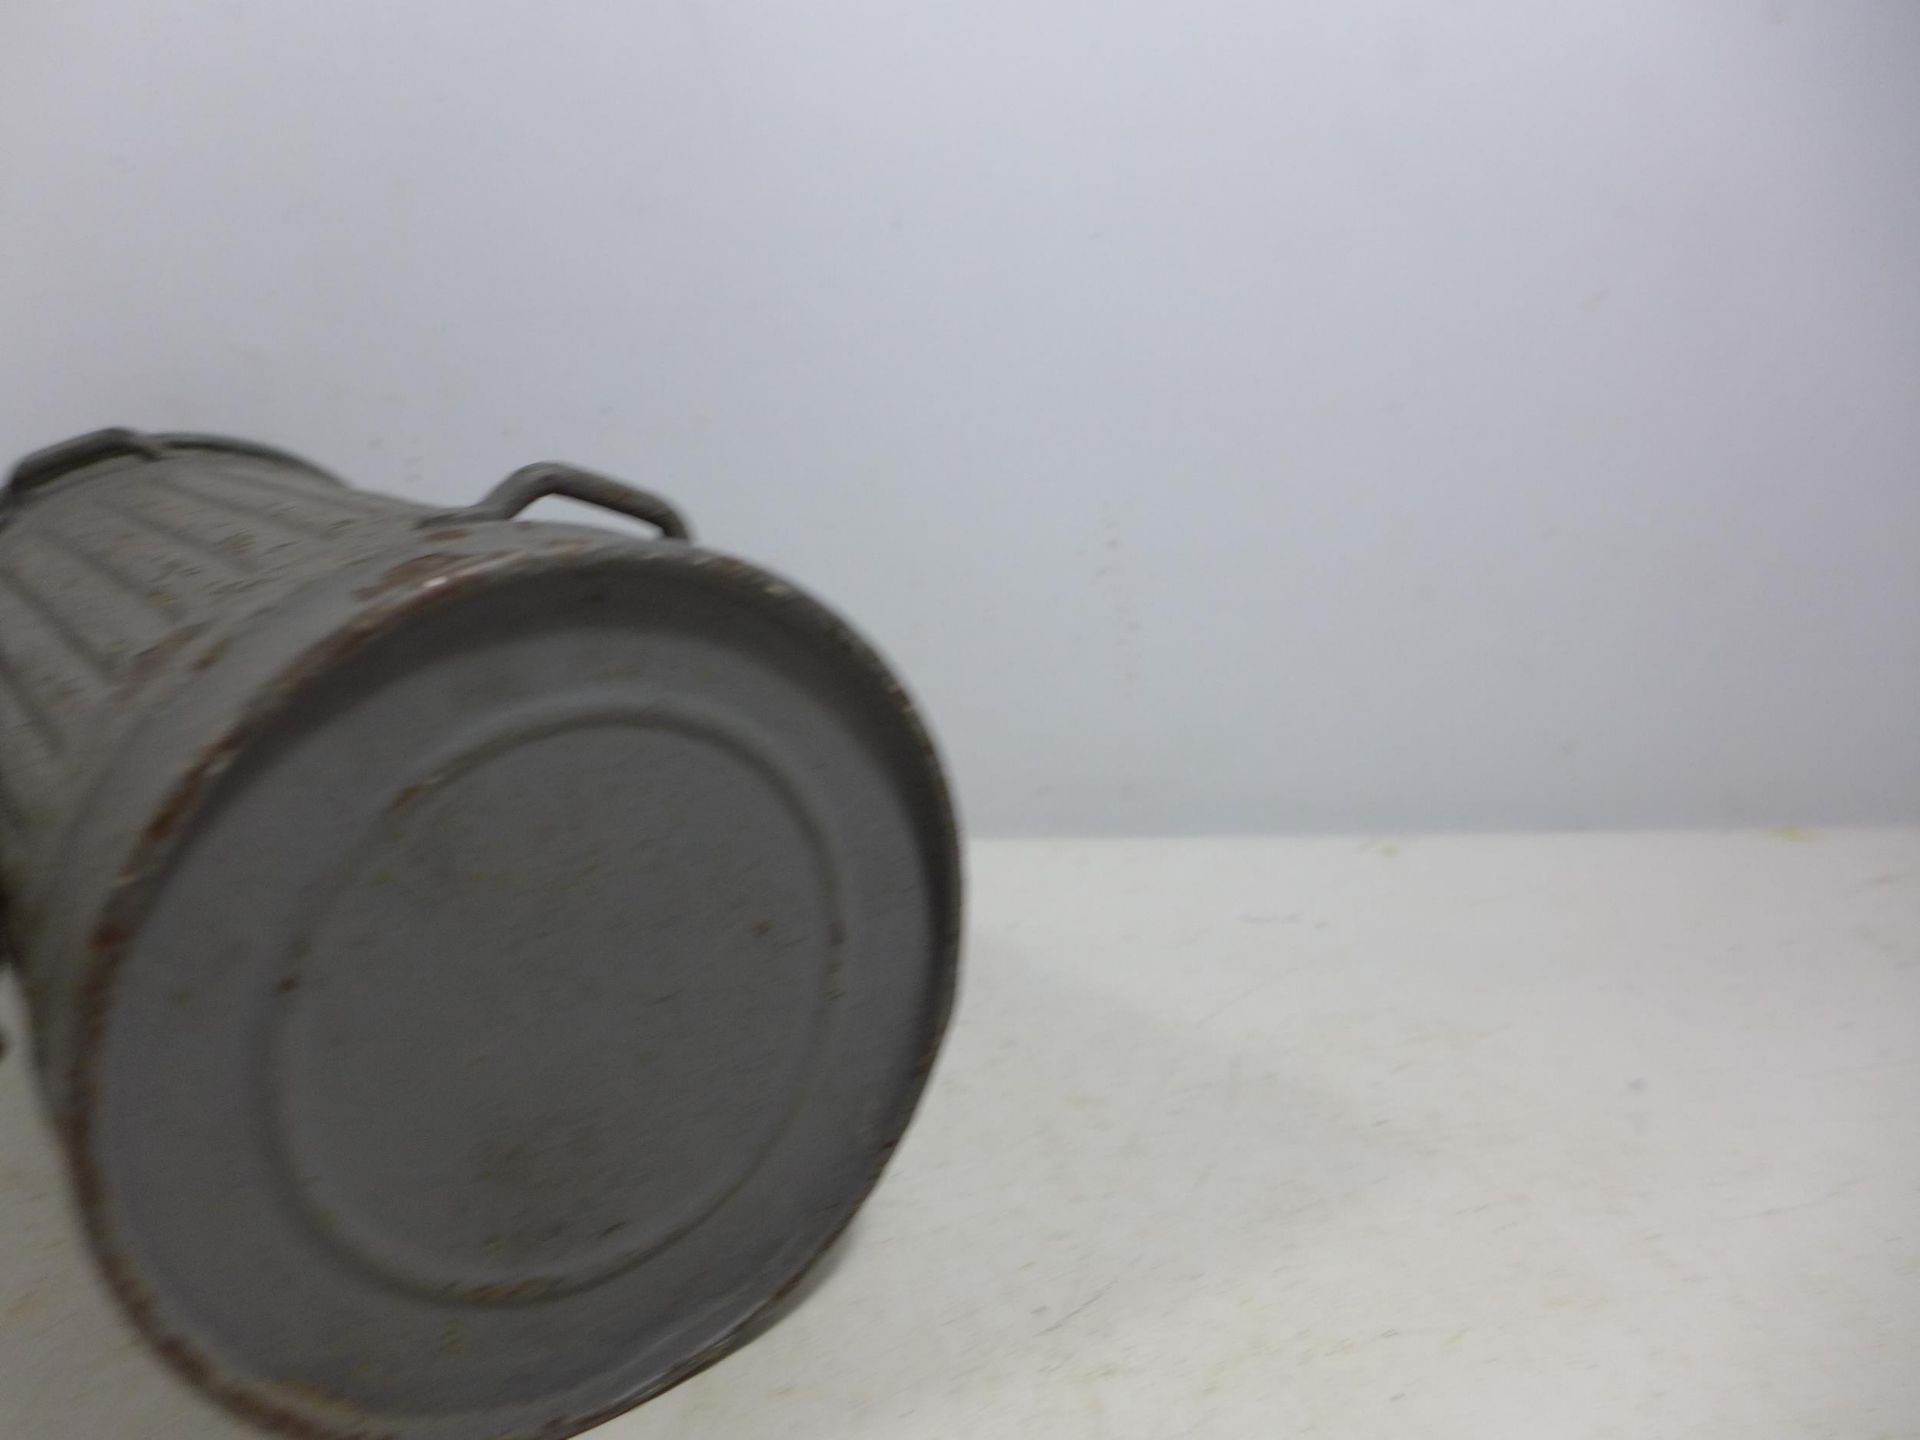 A MID 20TH CENTURY GERMAN GAS MASK AND METAL CONTAINER - Image 4 of 5